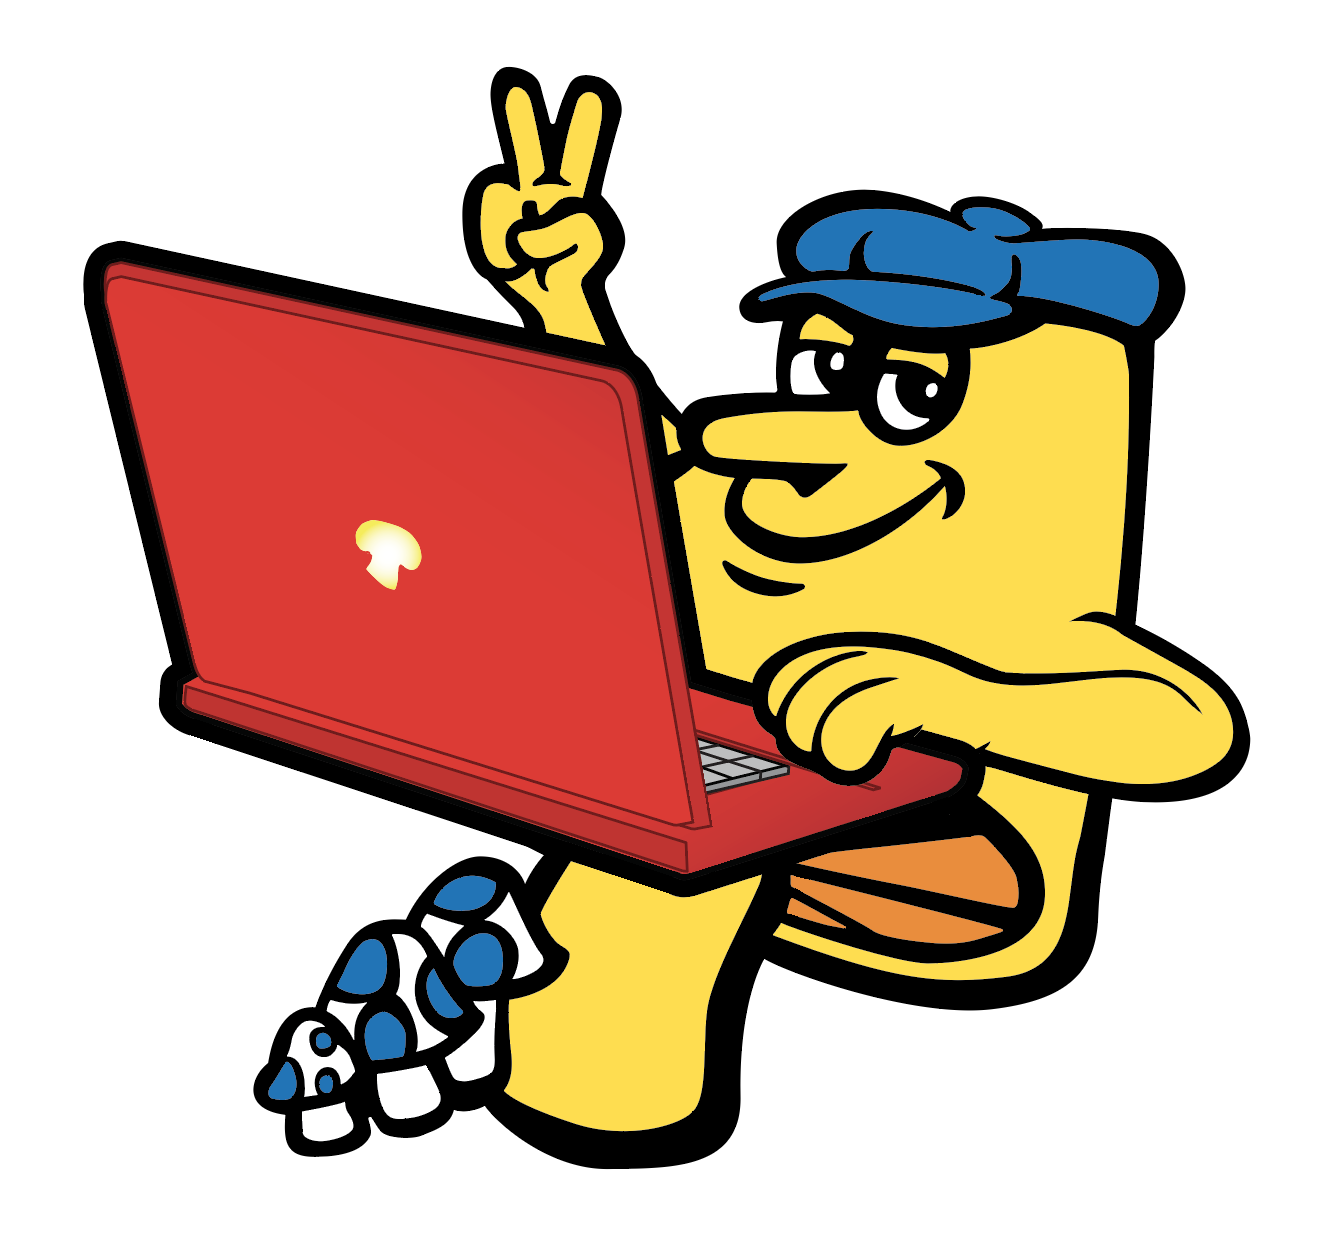 A cartoon of a person holding a computer

Description automatically generated with low confidence